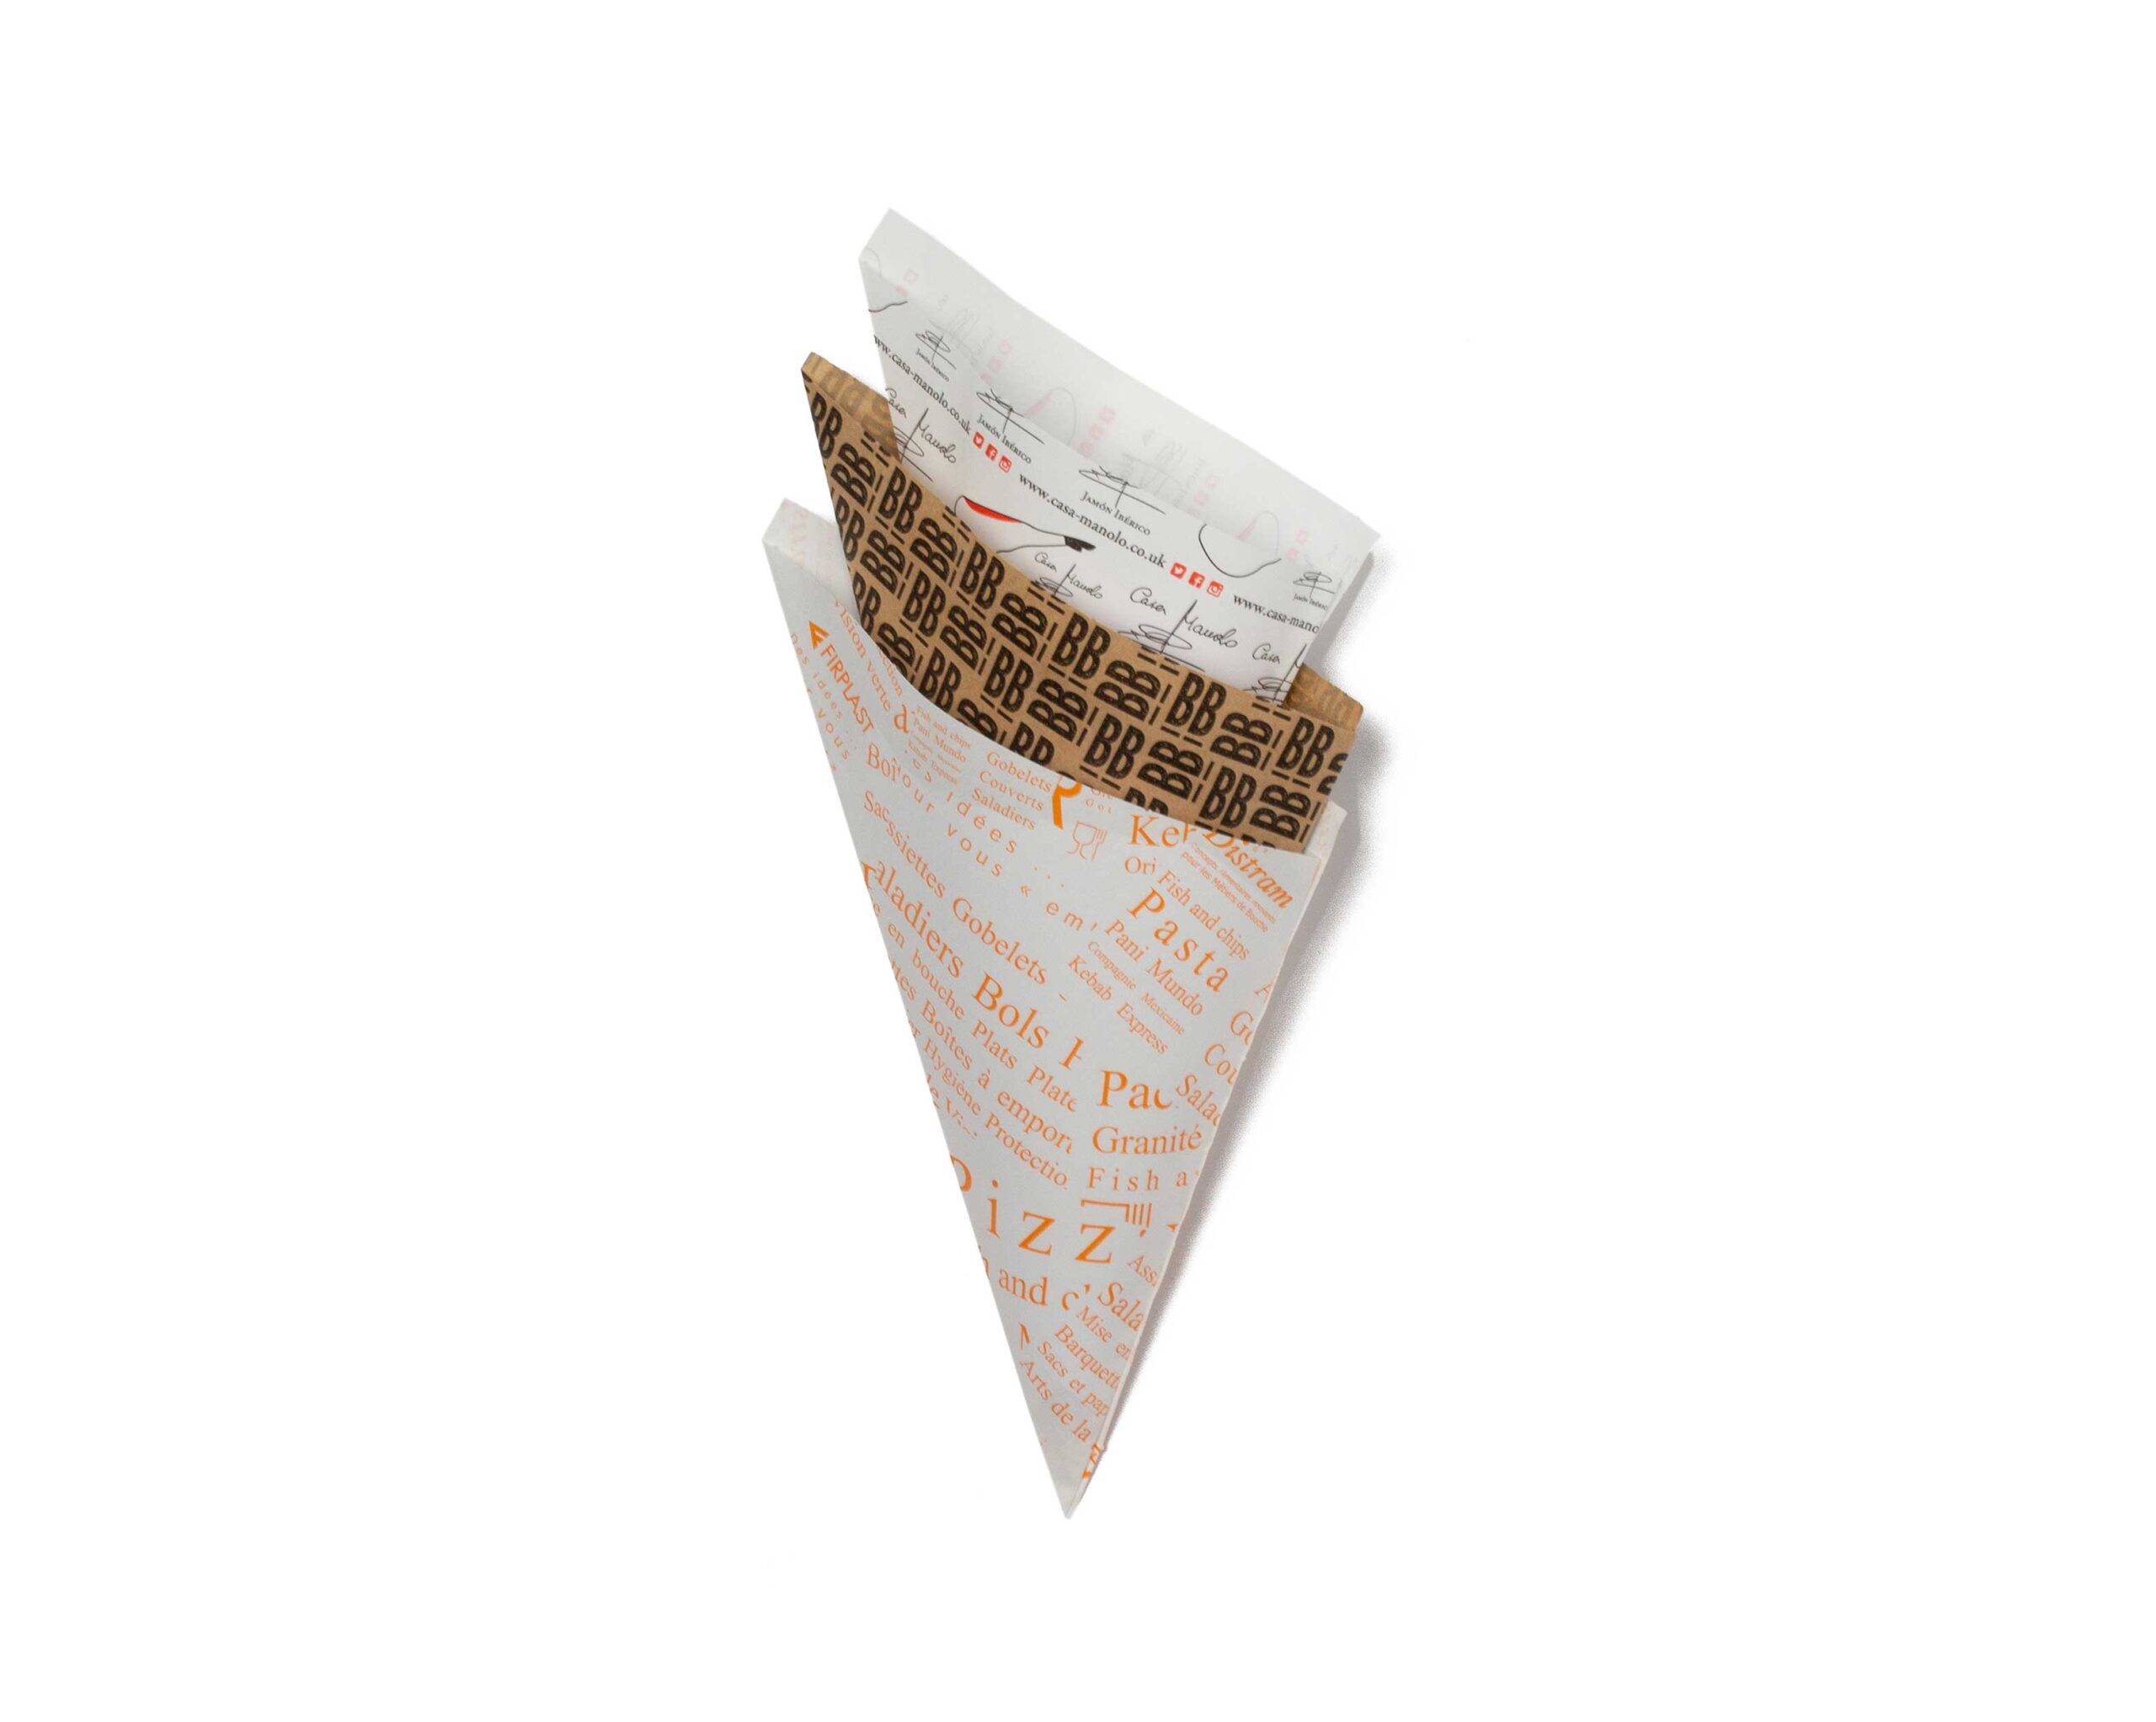 Personalized paper cones for fried foods